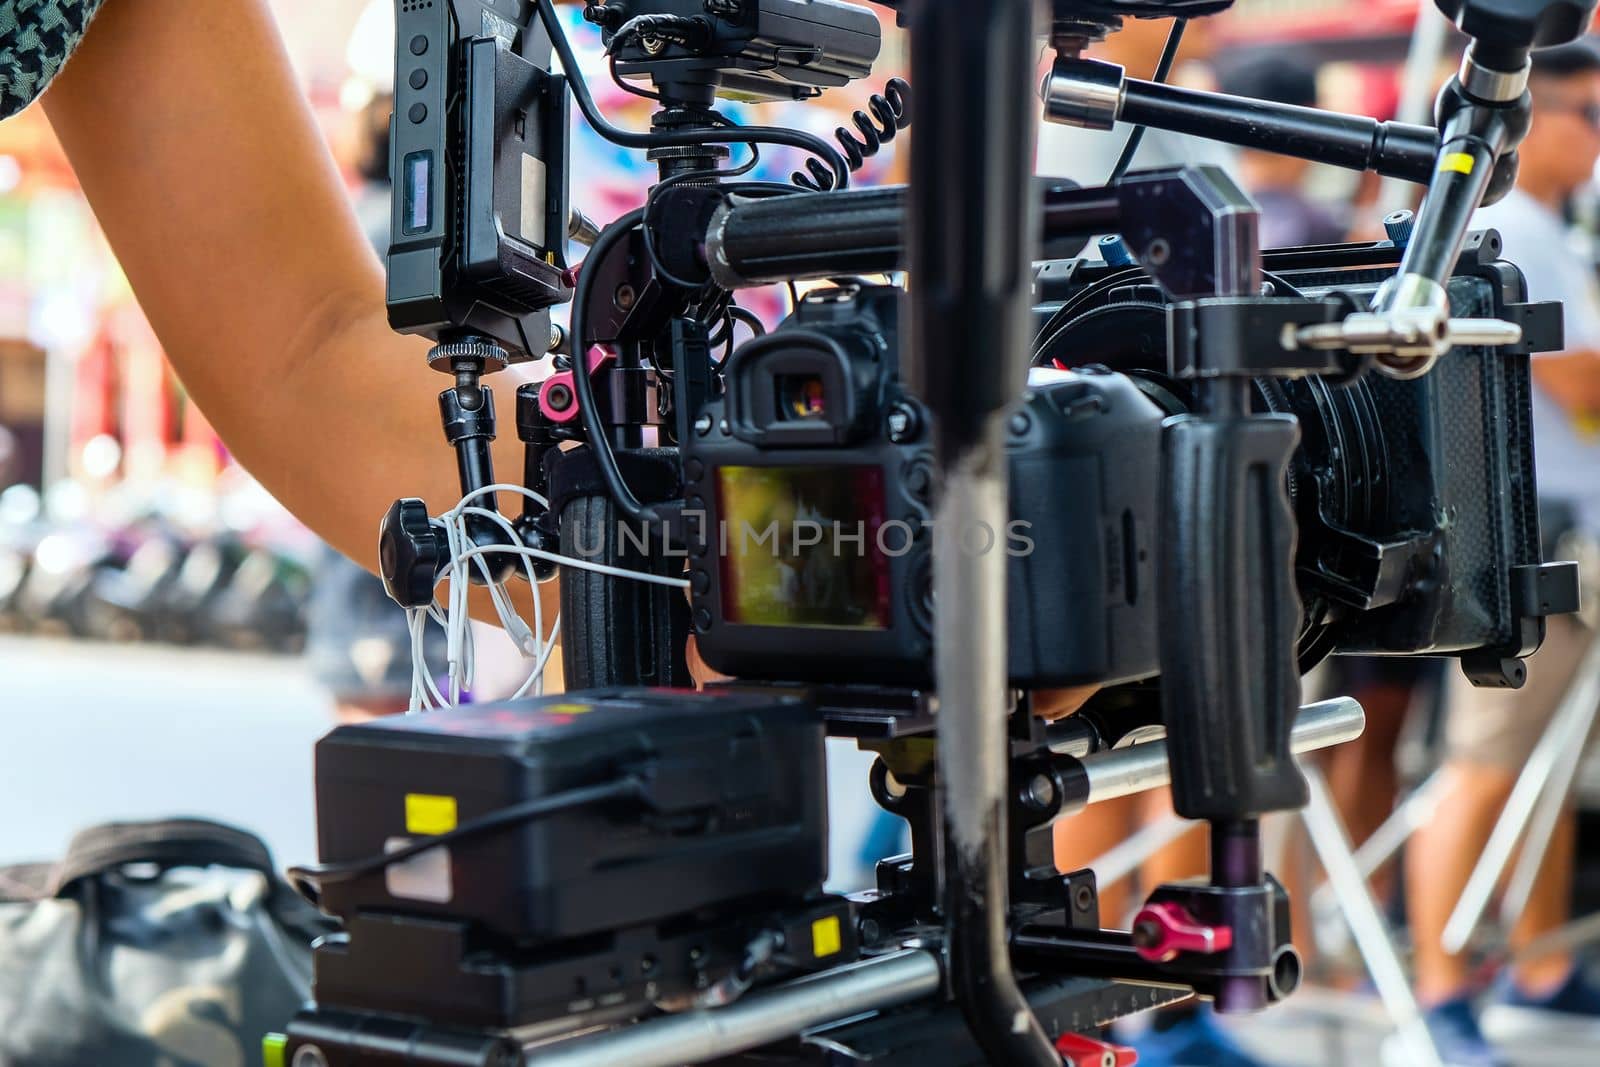 detail of Video camera , film crew production, behind the scenes background